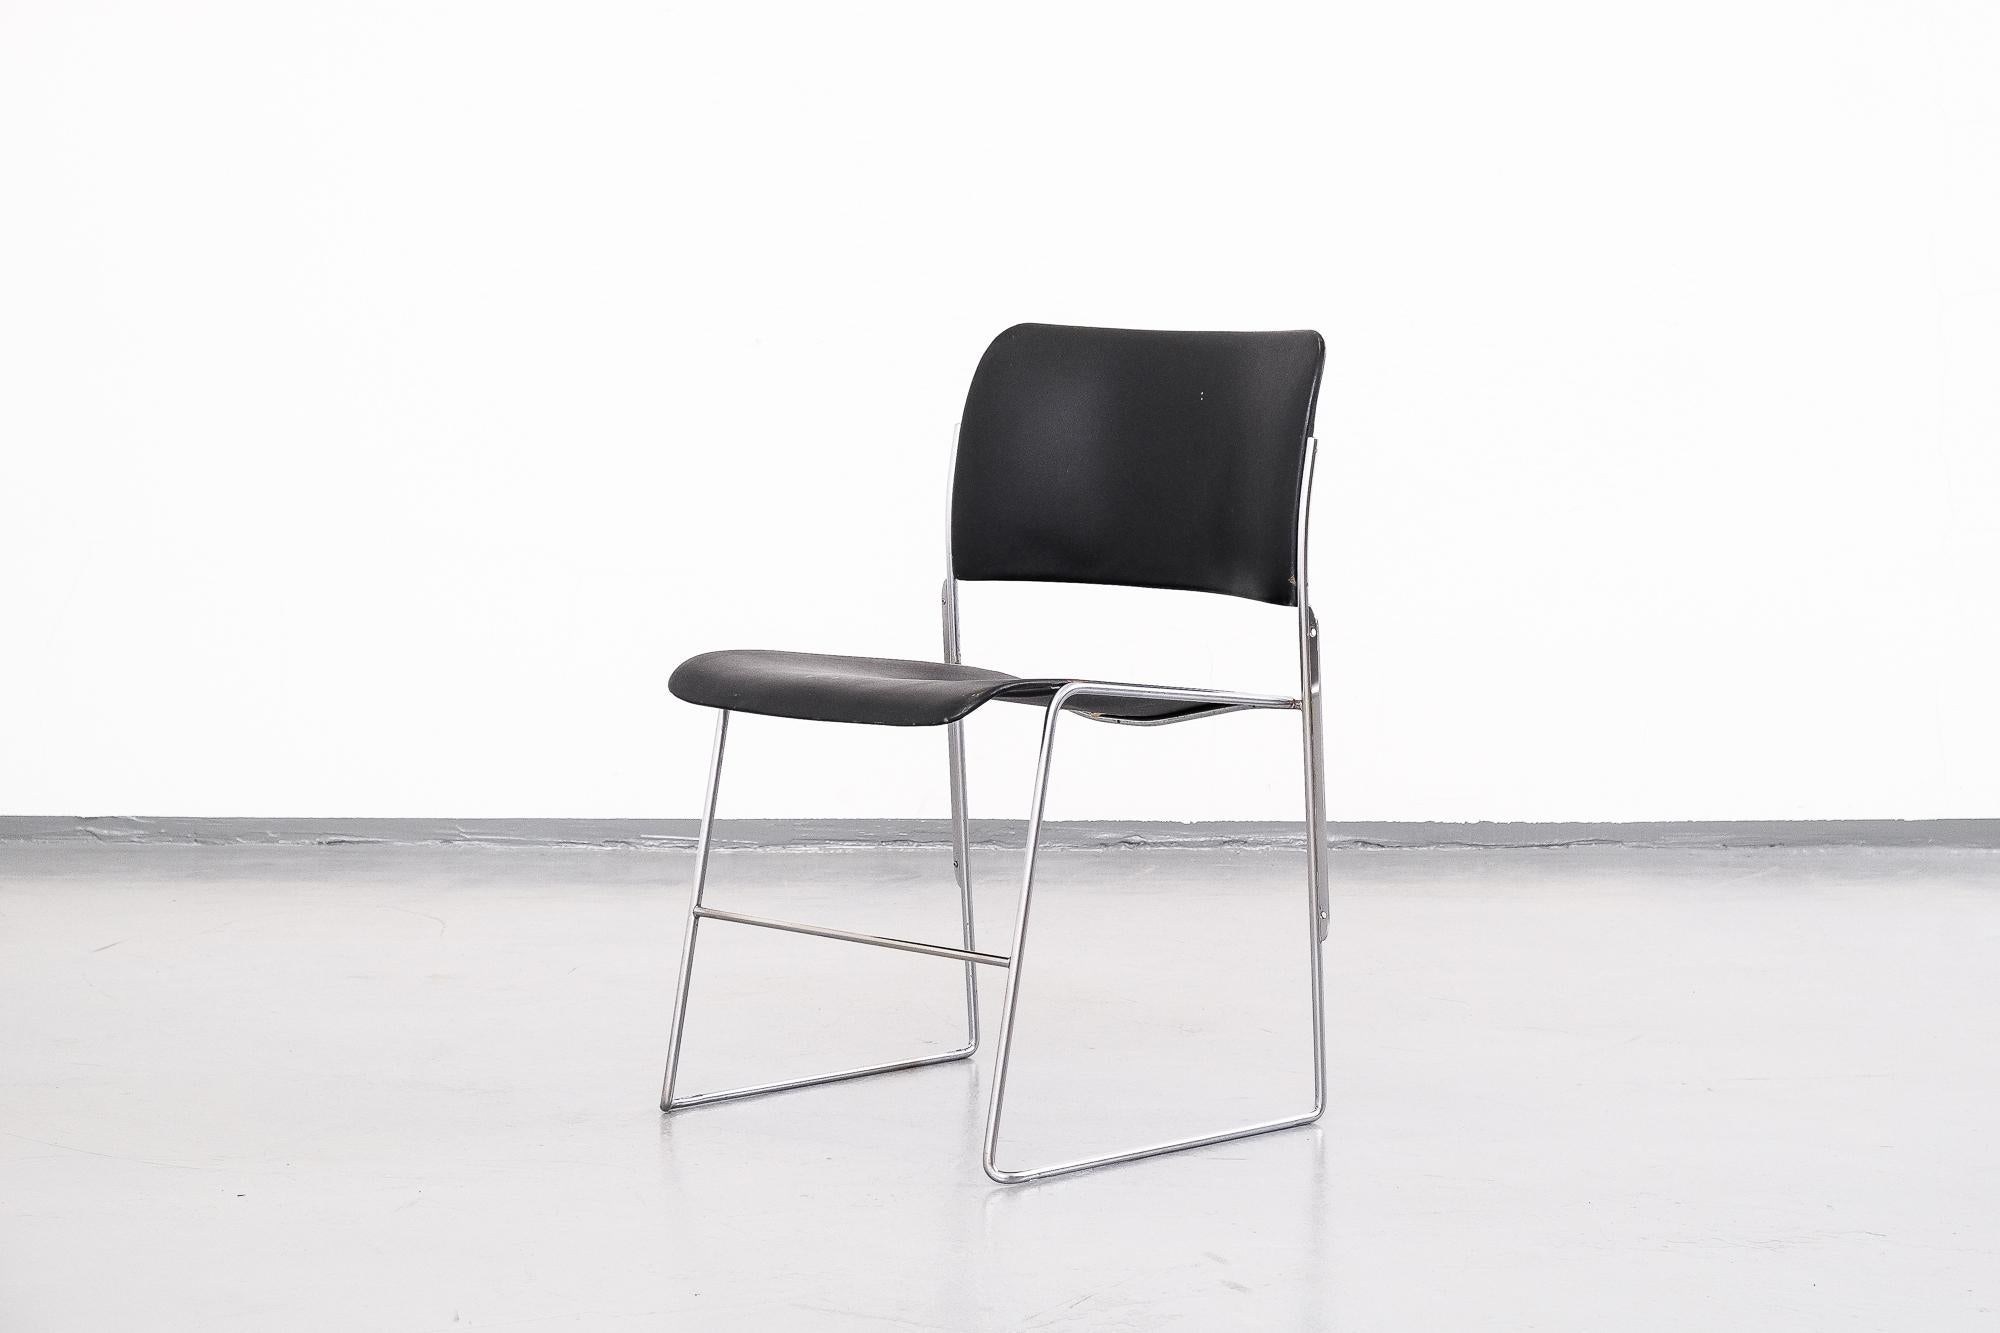 This chair was designed in 1964 by David Rowland and awarded many design awards. It is also featured in design collections and museums over the world, in recognition of its elegant lines, excellent ergonomics, unsurpassed stacking and handling, as